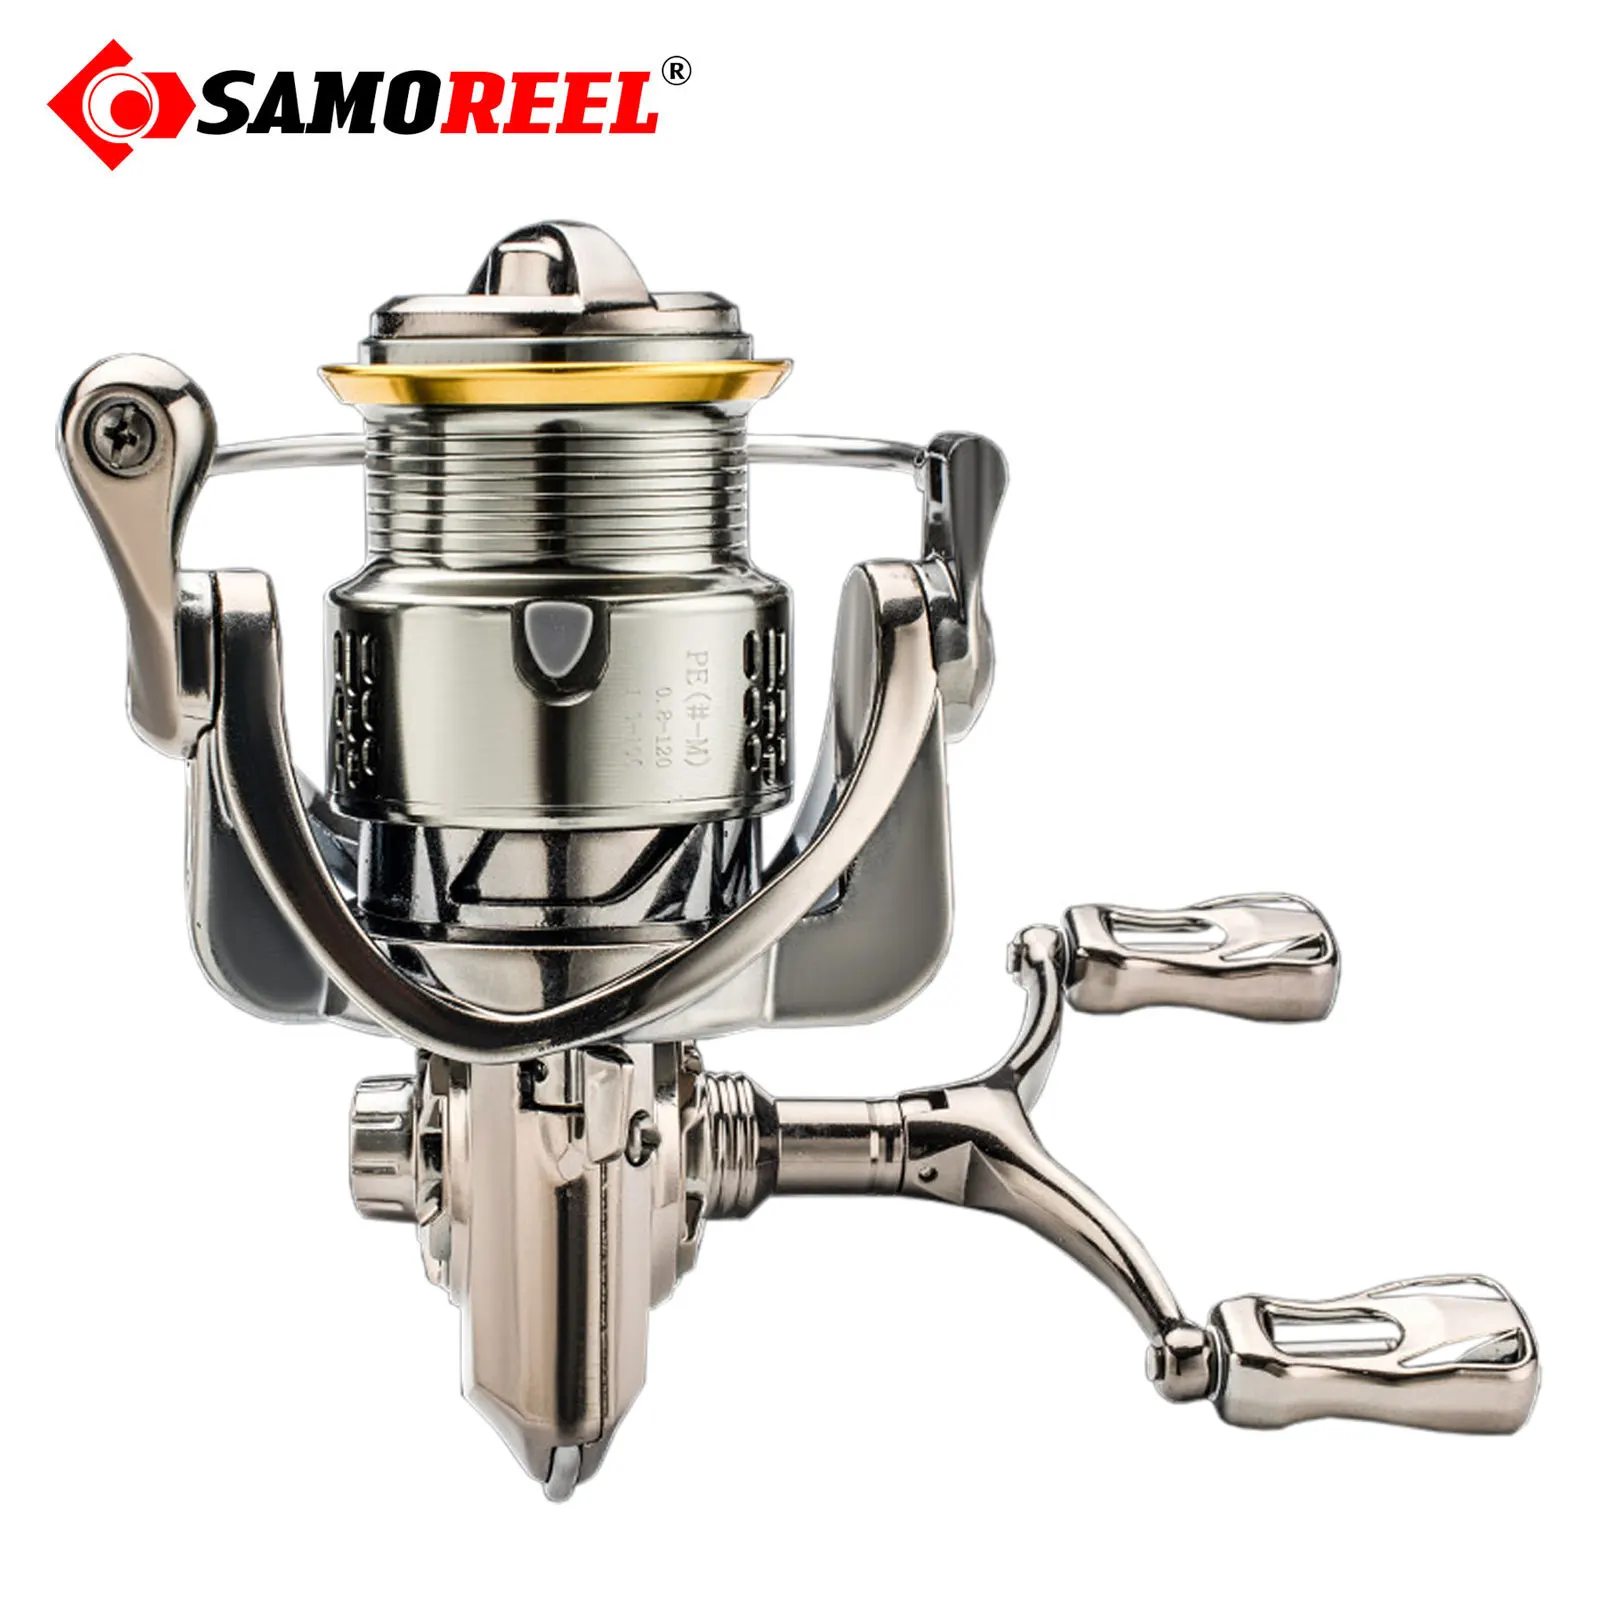 

Lightweight Full Electroplating Spinning Fishing Reel 5.2:1 8kg Drag Metal Shallow Spool Saltwater Molinete Tackle For Bass Pike